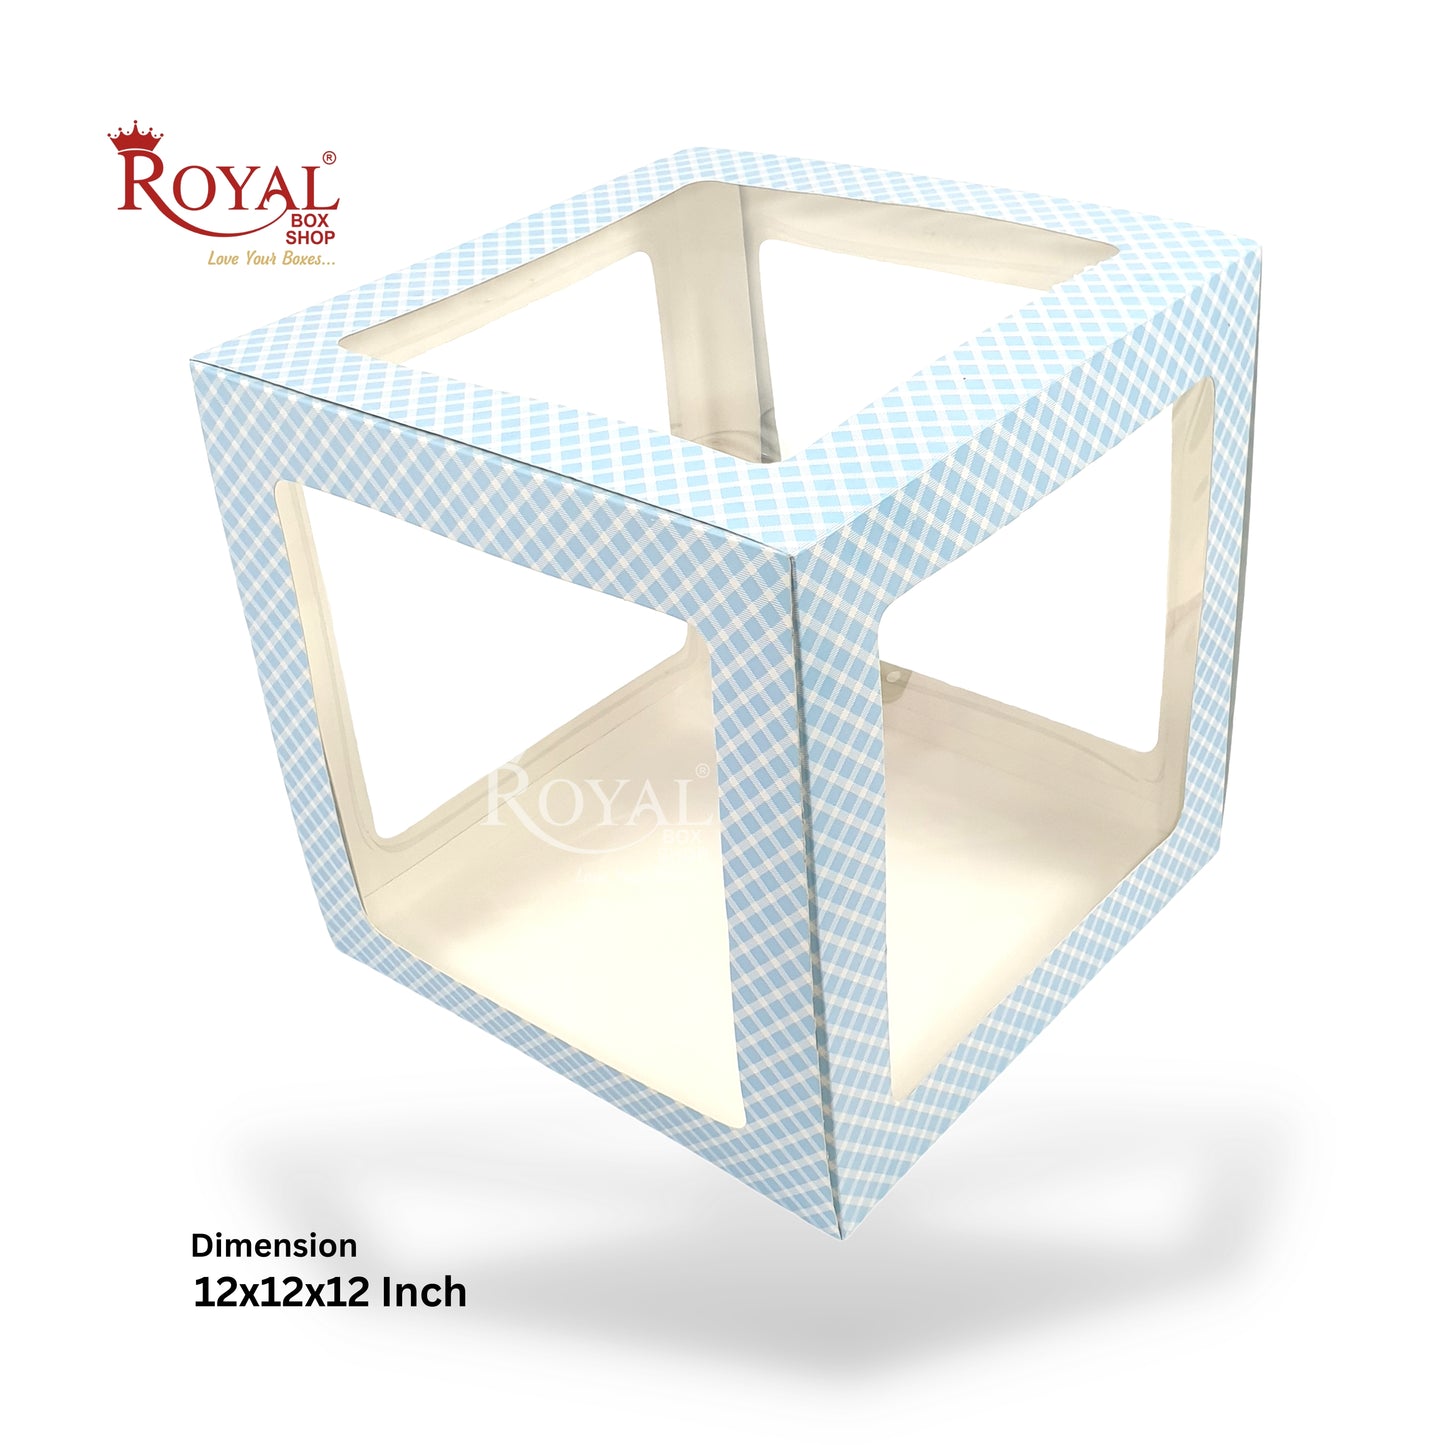 RoyalBoxShop® 5-Window Gift Box I 12x12x12 Inch I Blue Check I Perfect for Bakery Cakes, Gifts, Parties, Any Occasion